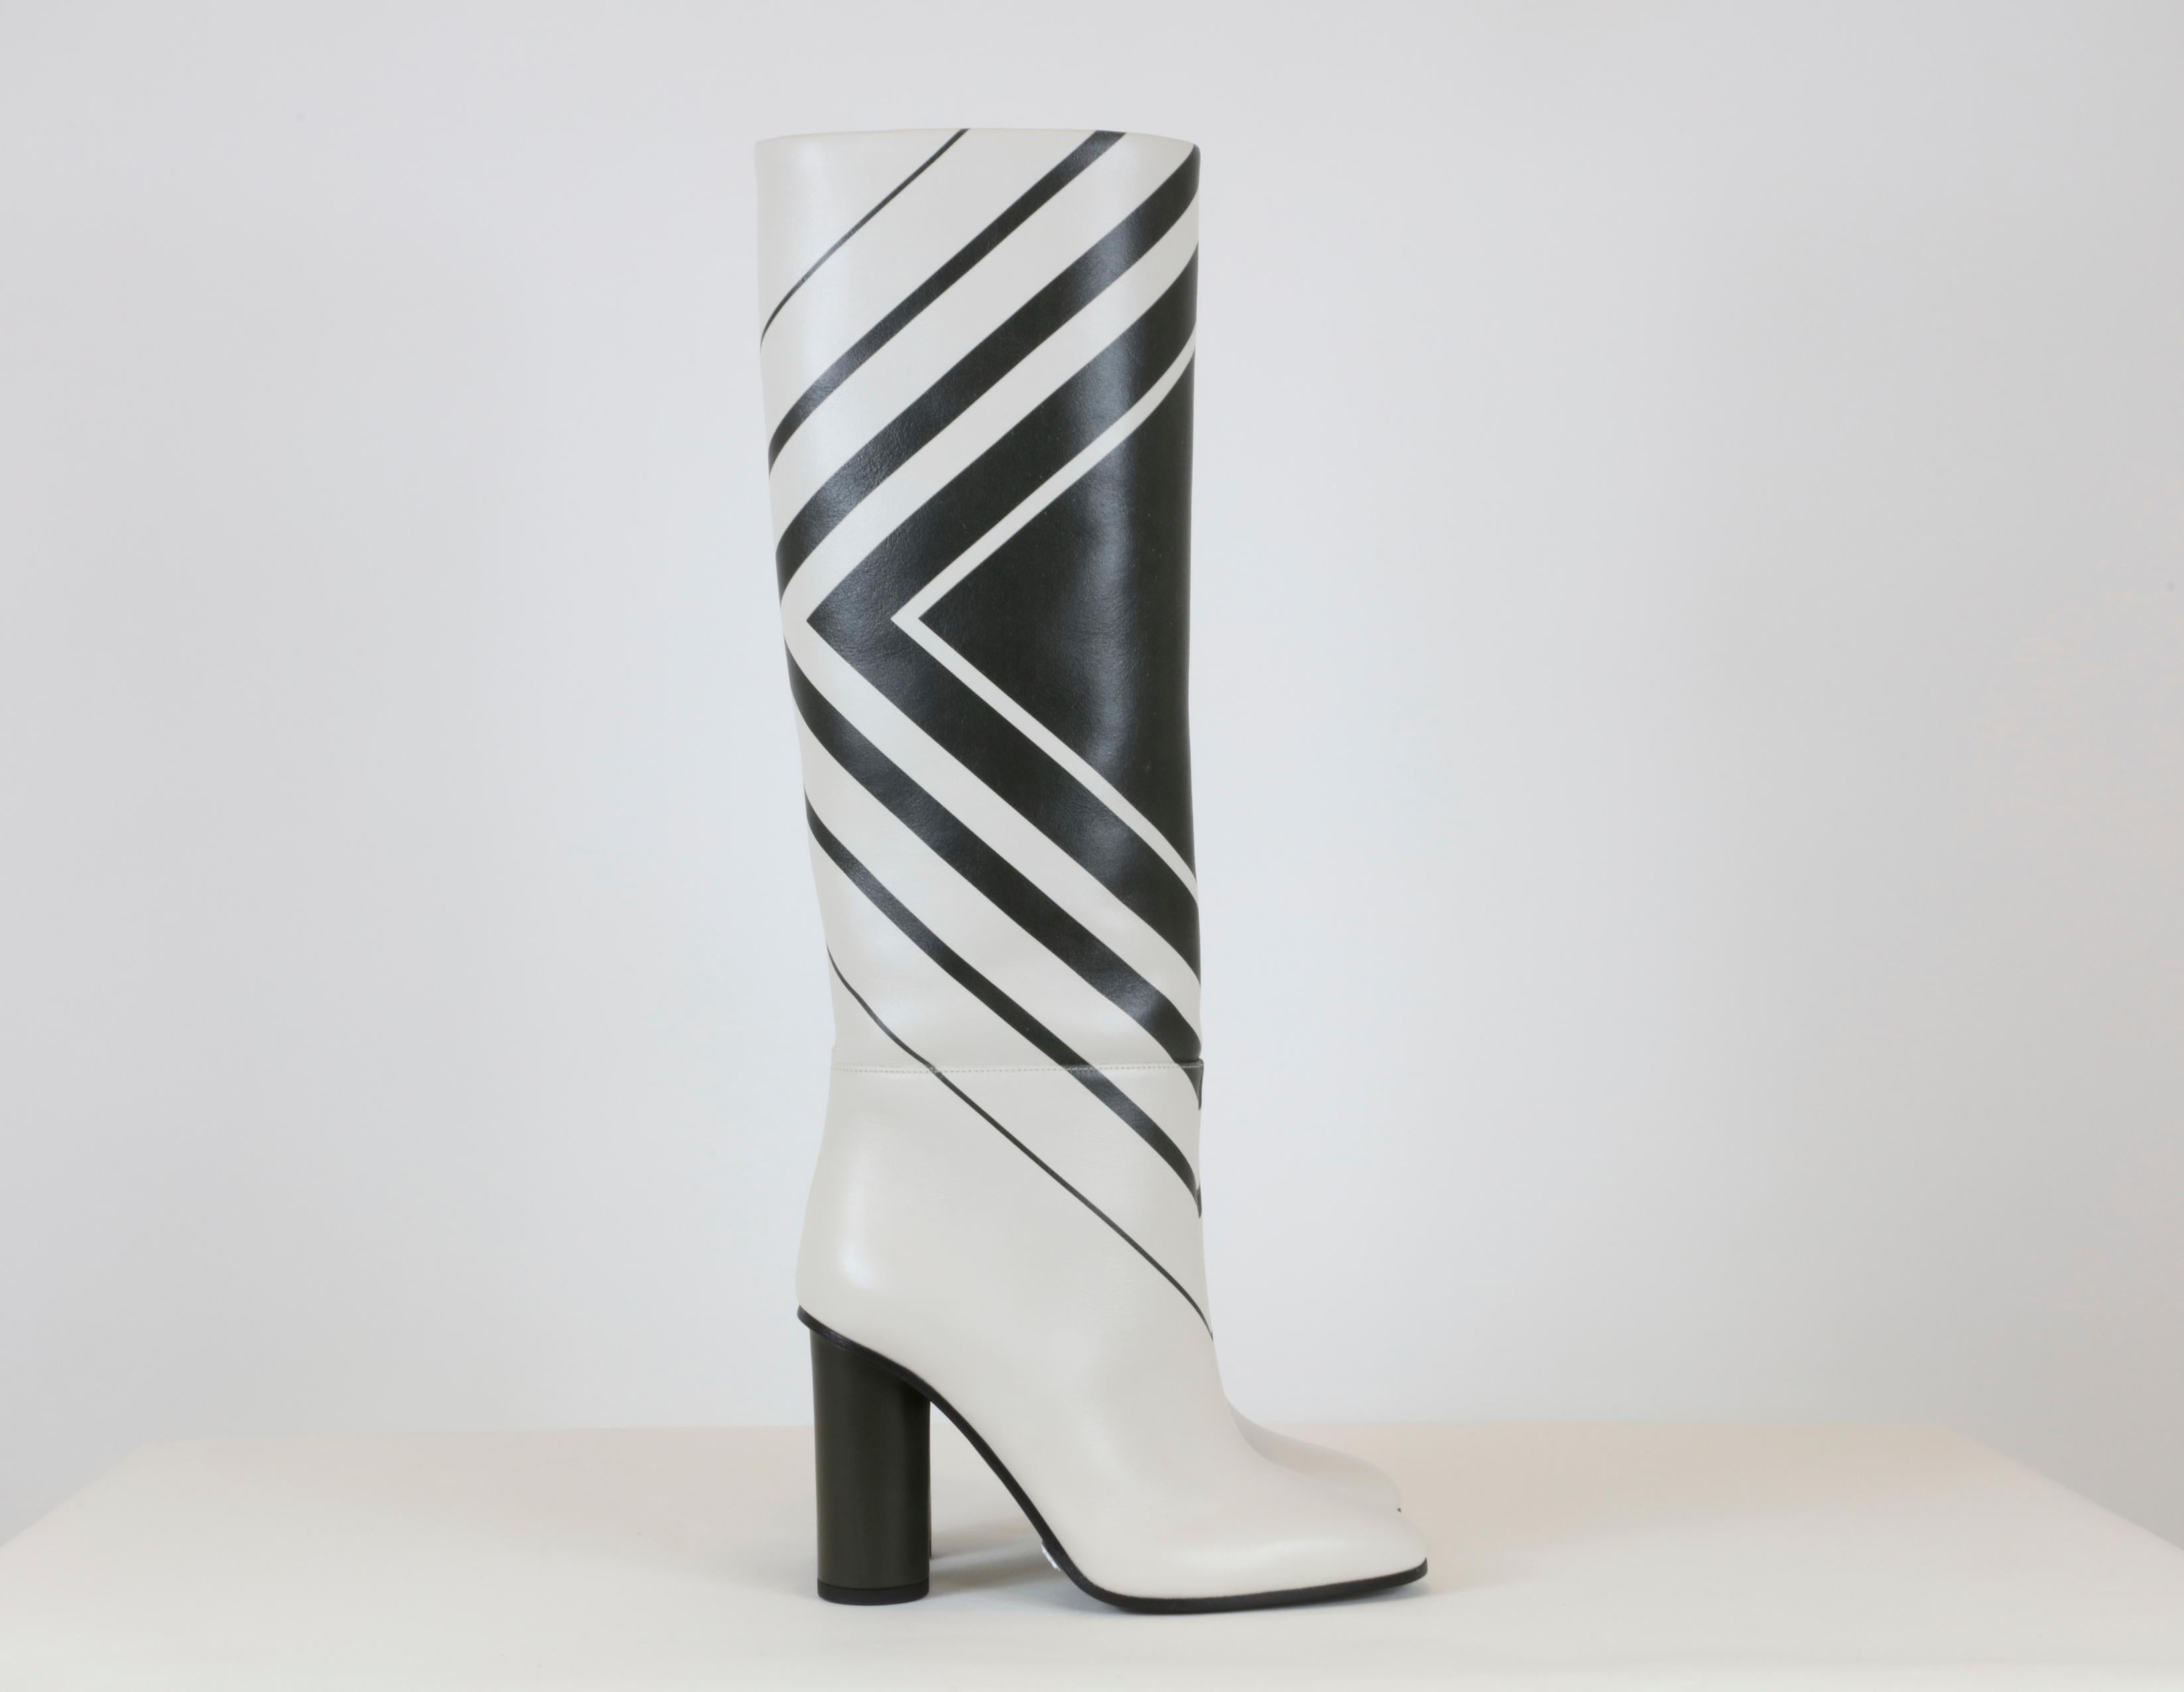 Anya Hindmarch White Boots
Size 6
Near Perfect Condition